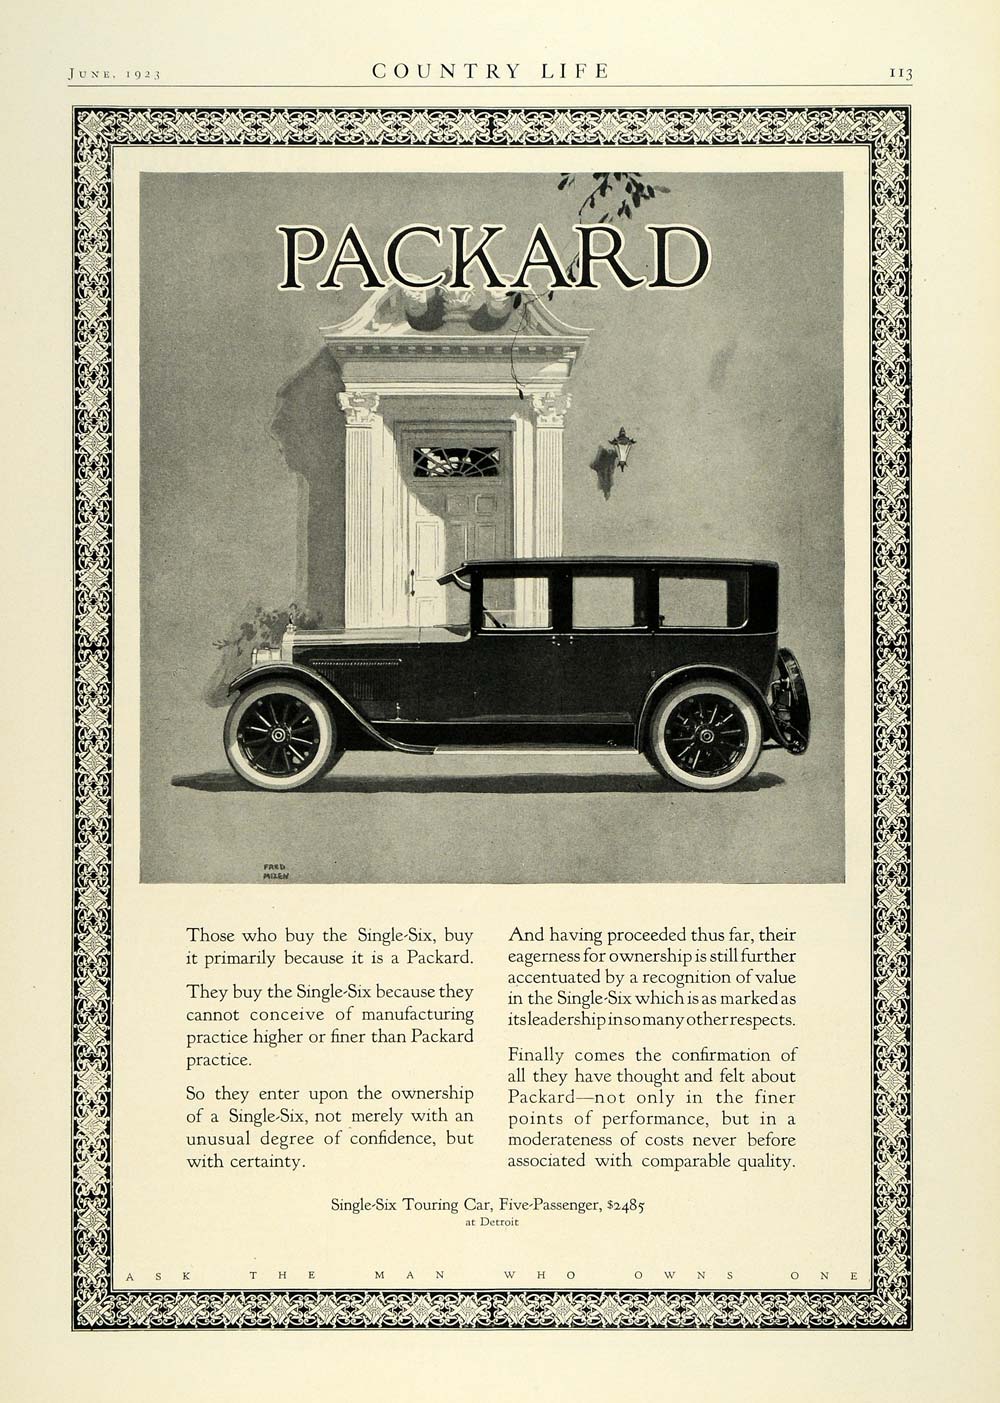 1923 Ad Packard Single Six Touring Car Five Passenger Home Entrance Door COL3